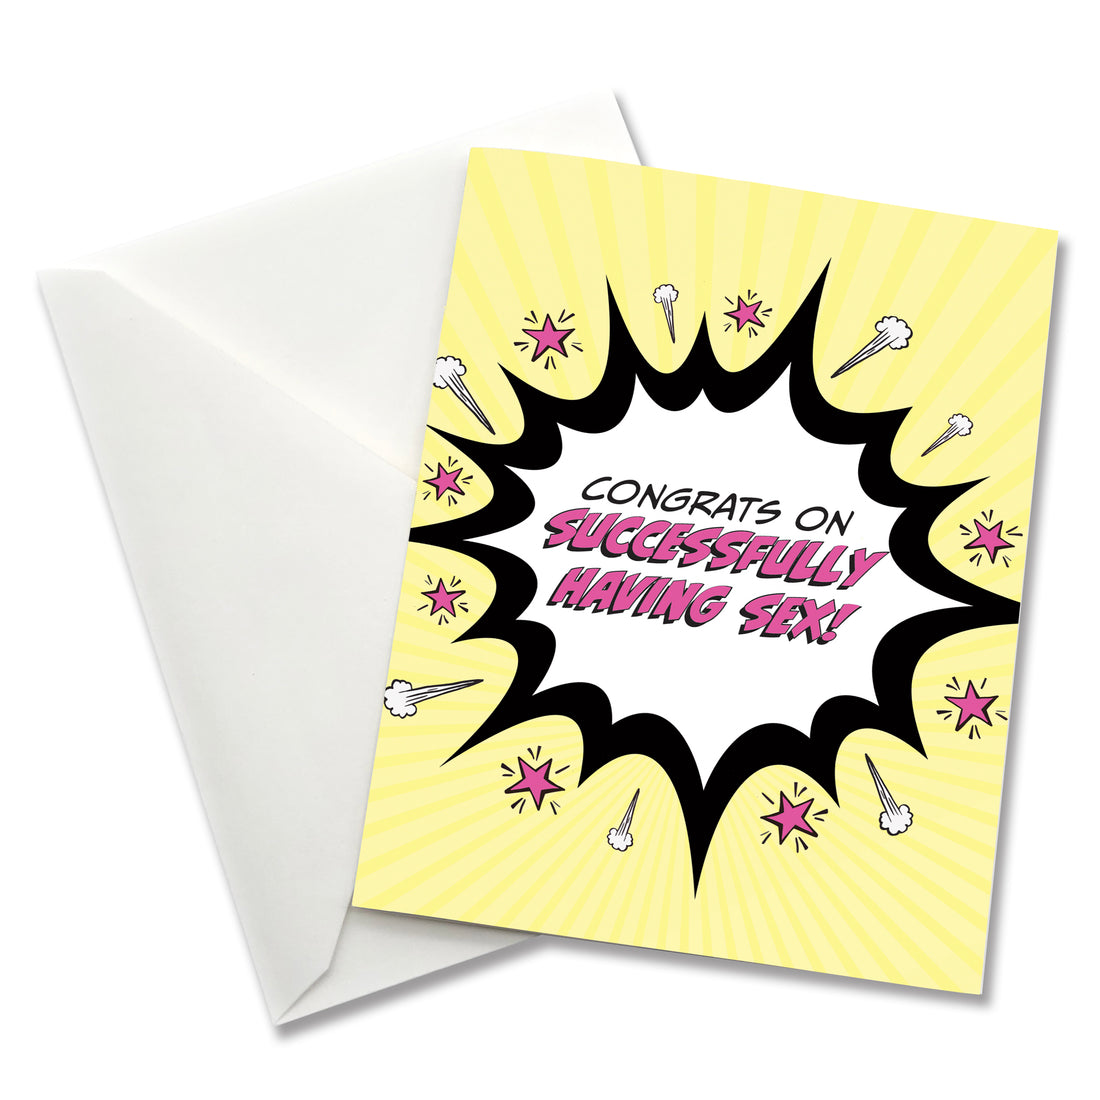 Greeting Card: Pop Life, Congrats on Successfully Having Sex - Pack of 6